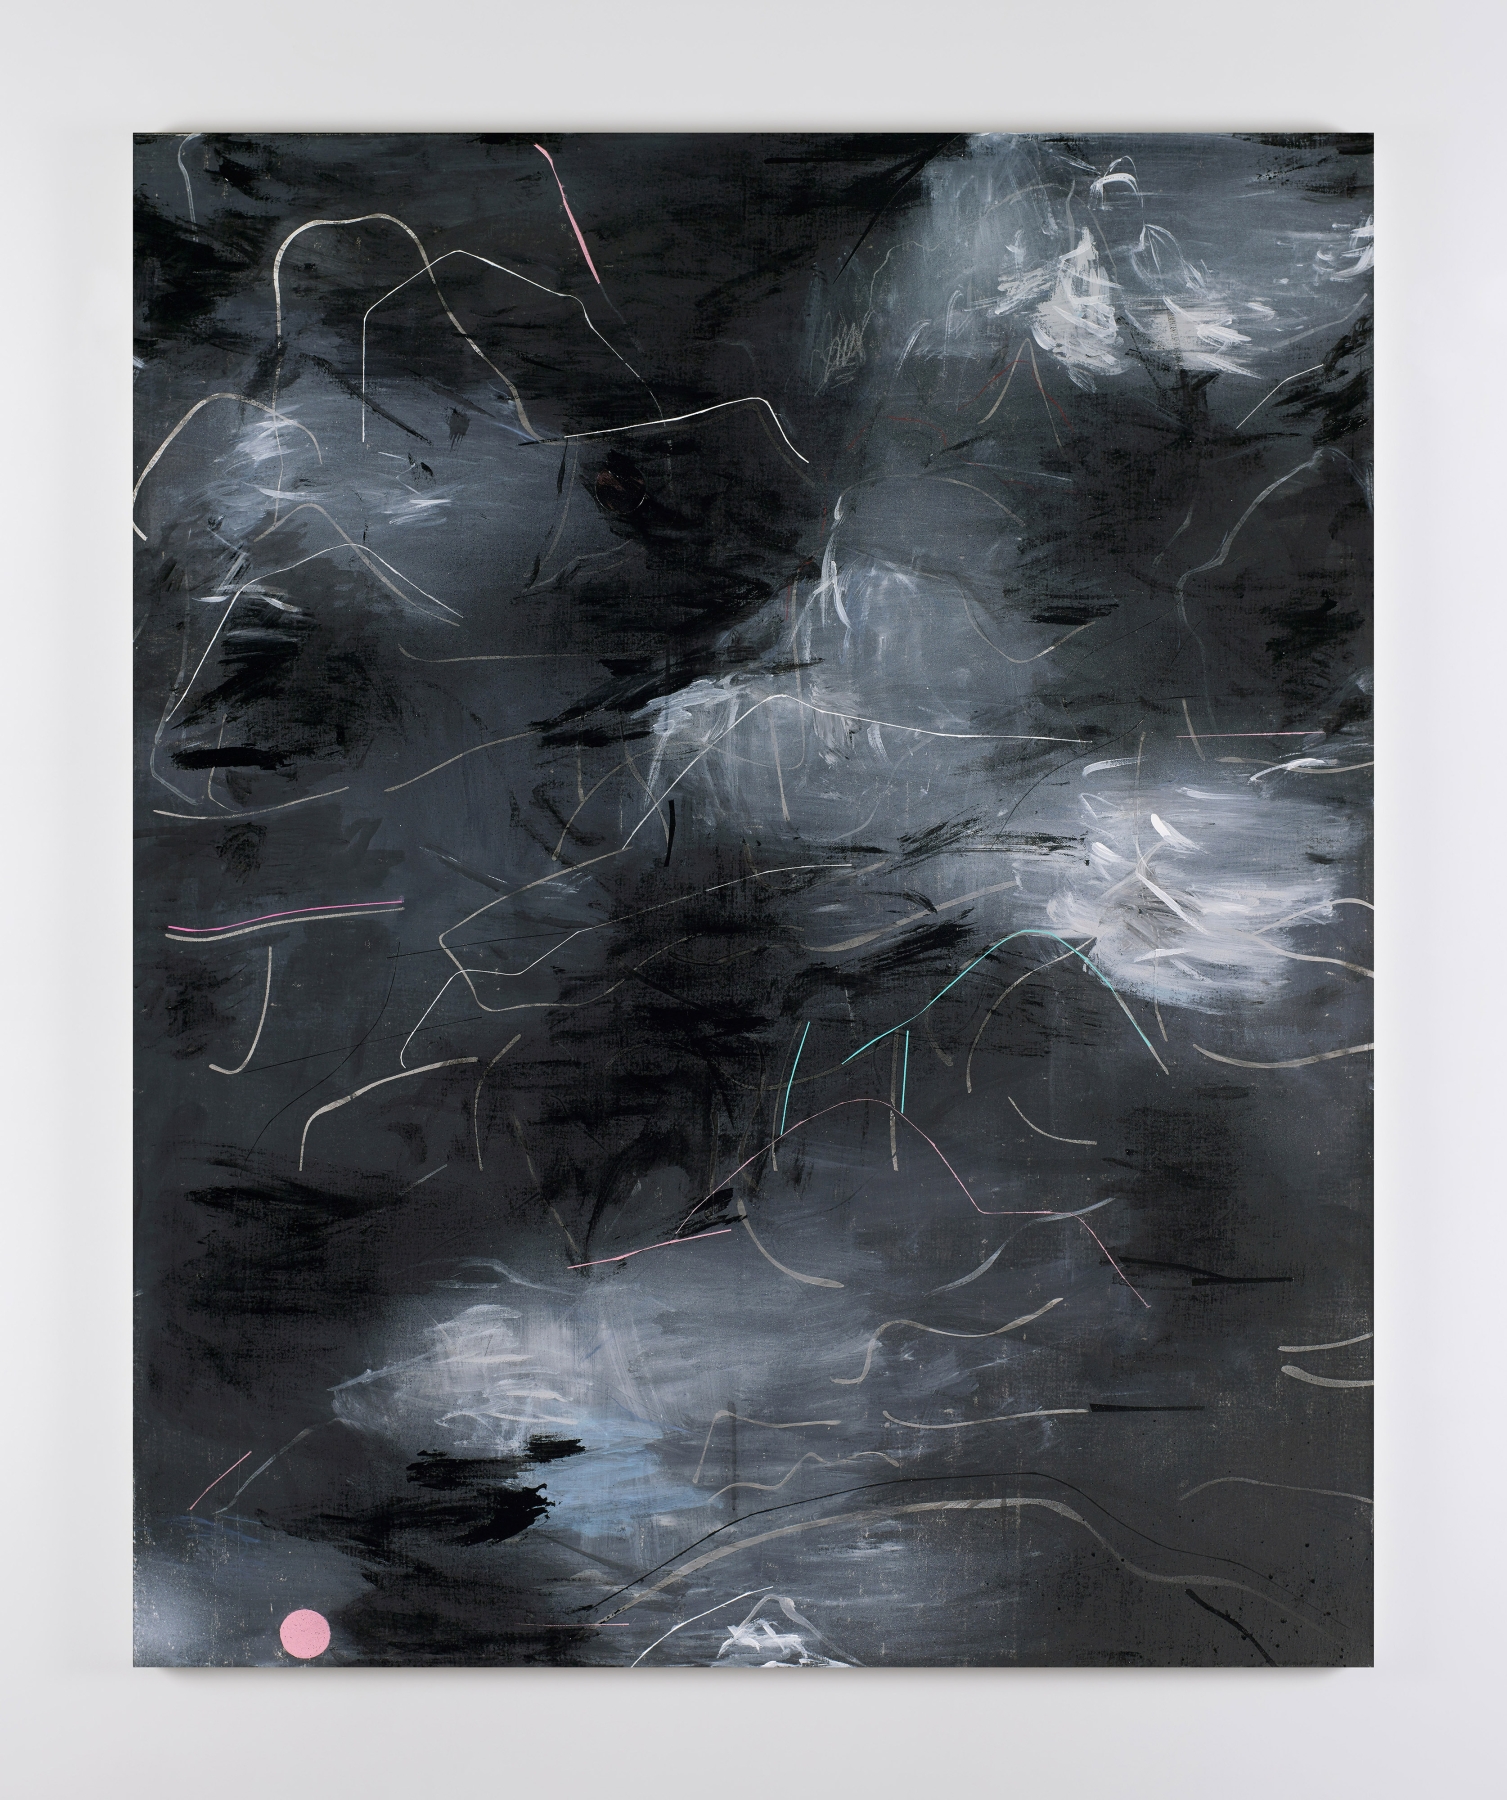 Zhou Li
Landscape of nowhere: Water and dreams No.6, 2022
mixed media on canvas
160 x 130 cm / 63 x 51.2 in